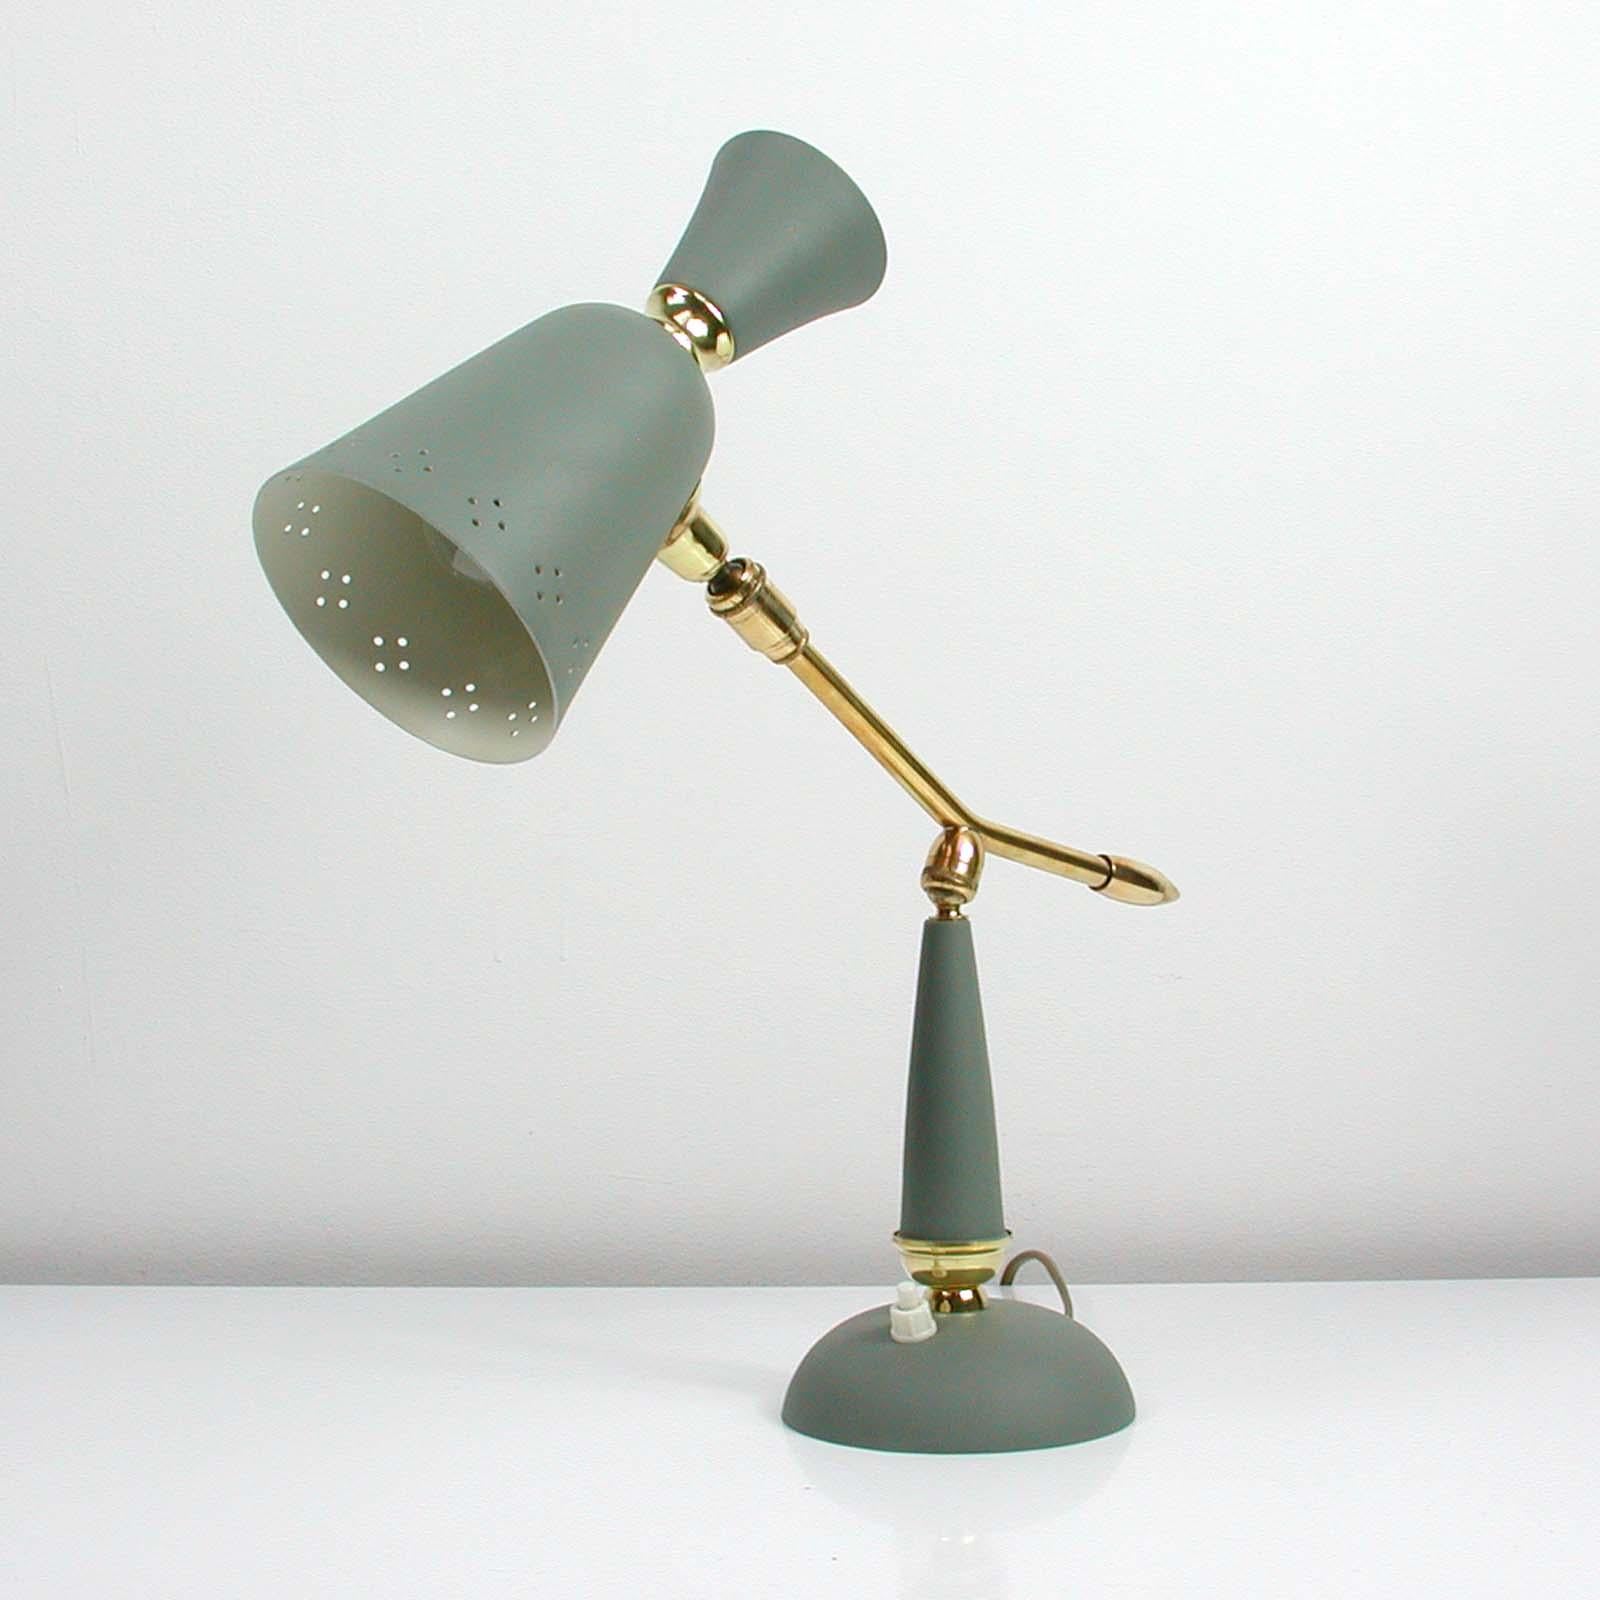 This vintage midcentury table lamp was manufactured in France in the 1950s. It is made of grey lacquered metal and has got an adjustable brass lamp arm and an adjustable lampshade.

The lamp has got a E27 socket. It has been partly restored and